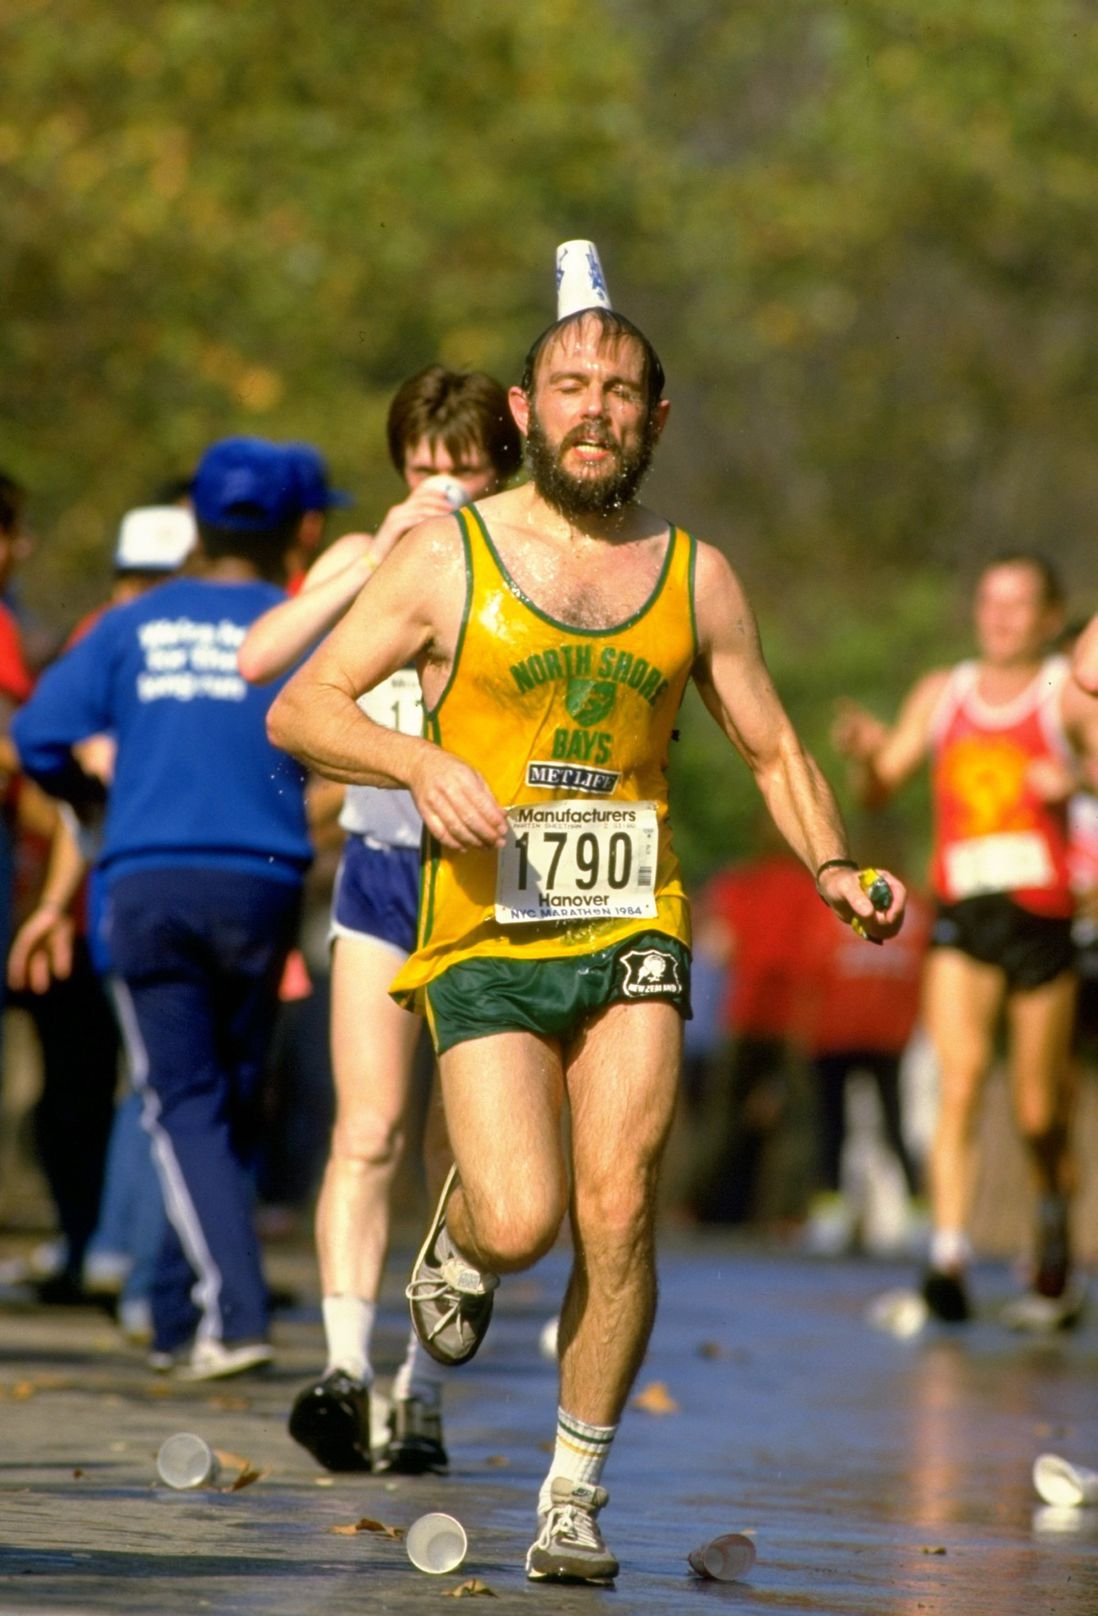 A competitor cools himself down at a watering station in Central Park during the 1984 NY Marathon. (<a href="http://www.gettyimages.com/license/1201940">David Cannon</a>/Allsport)